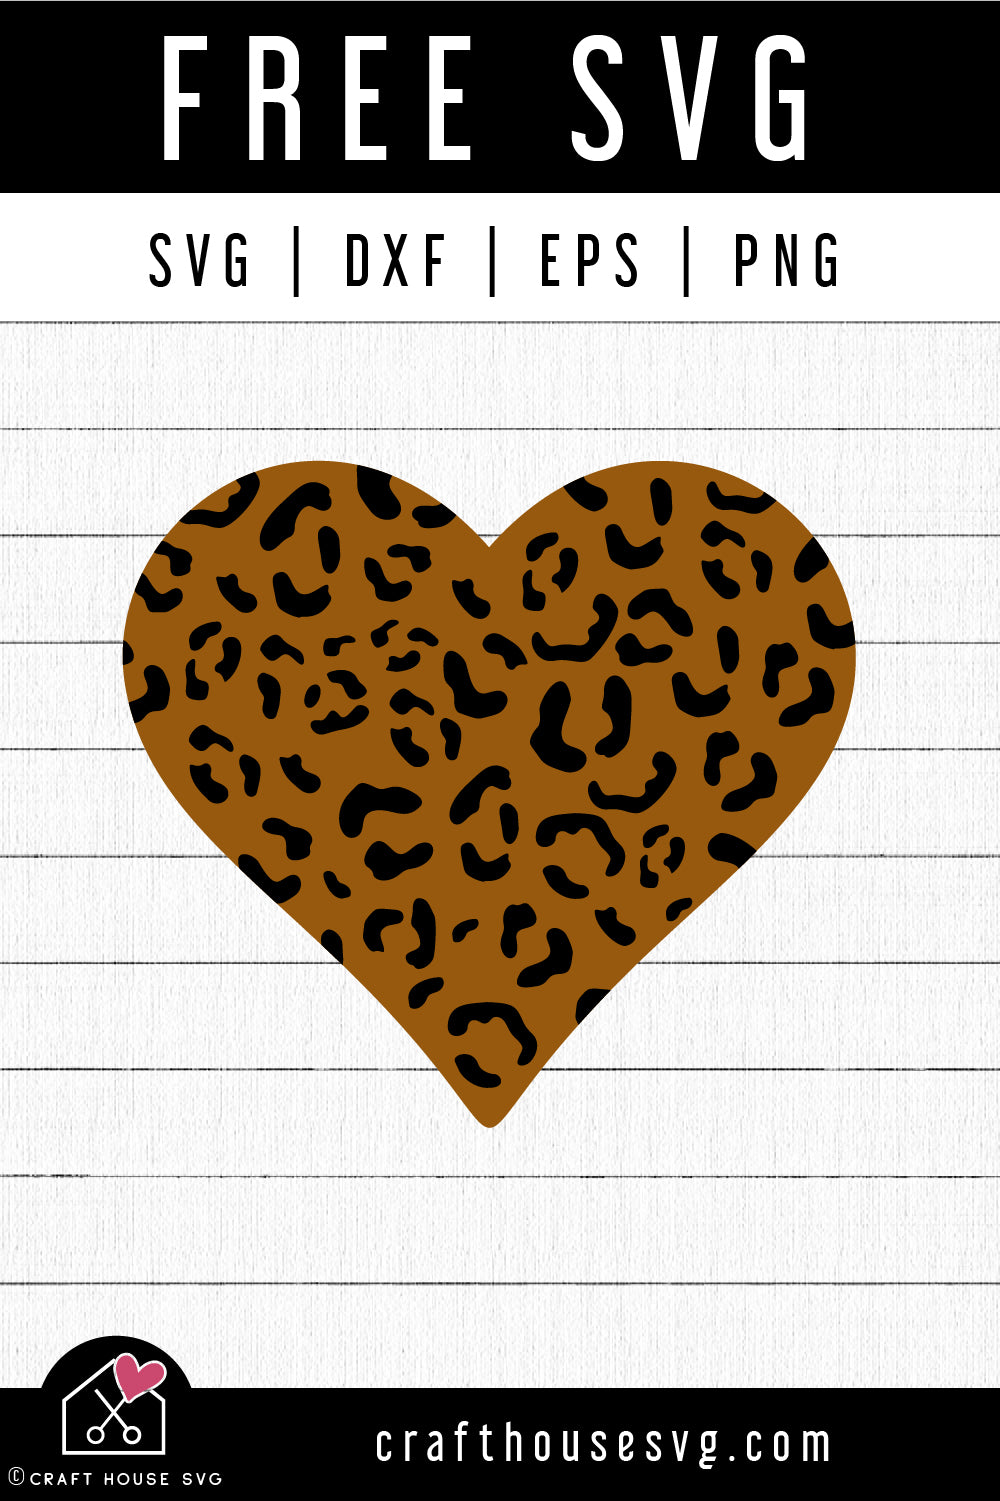 happy valentines day, love - free svg file for members - SVG Heart